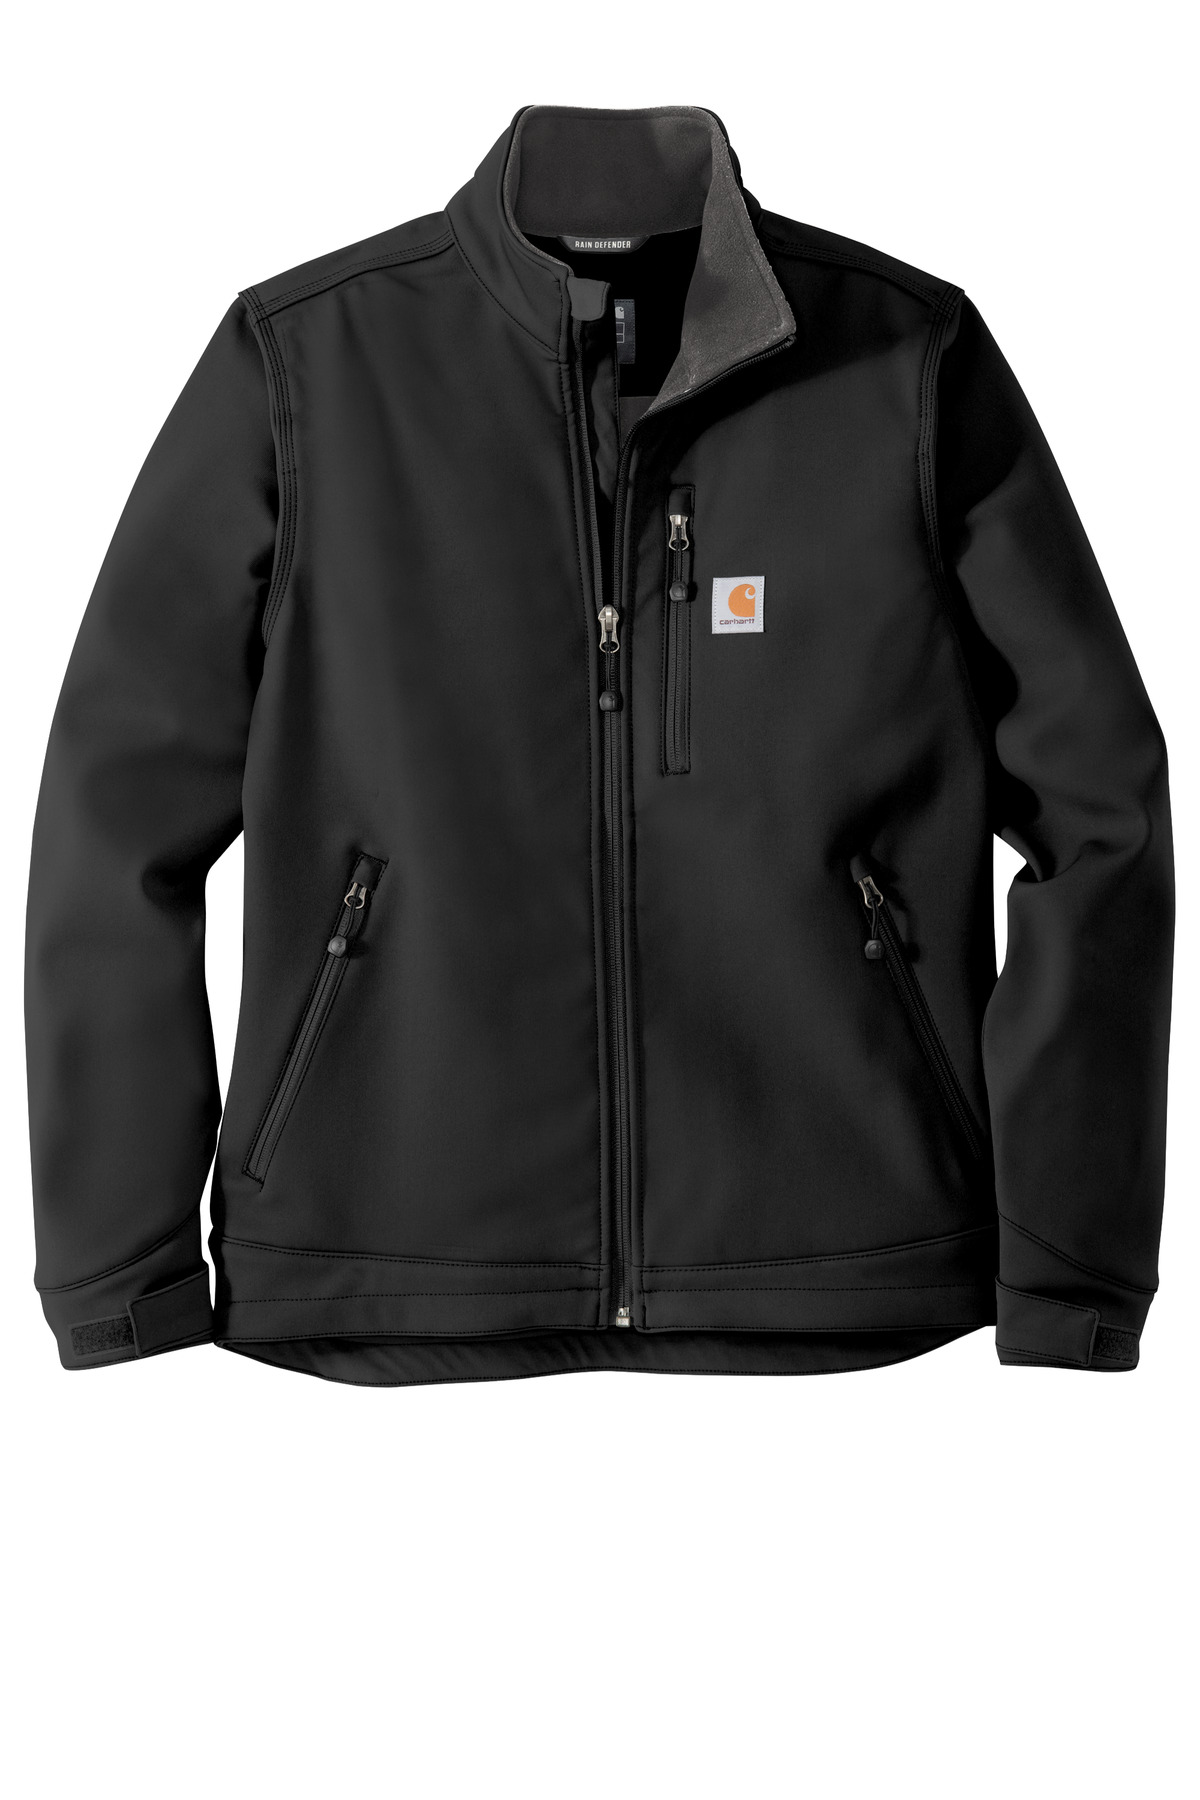 Crowley Soft Shell Jacket - CT102199